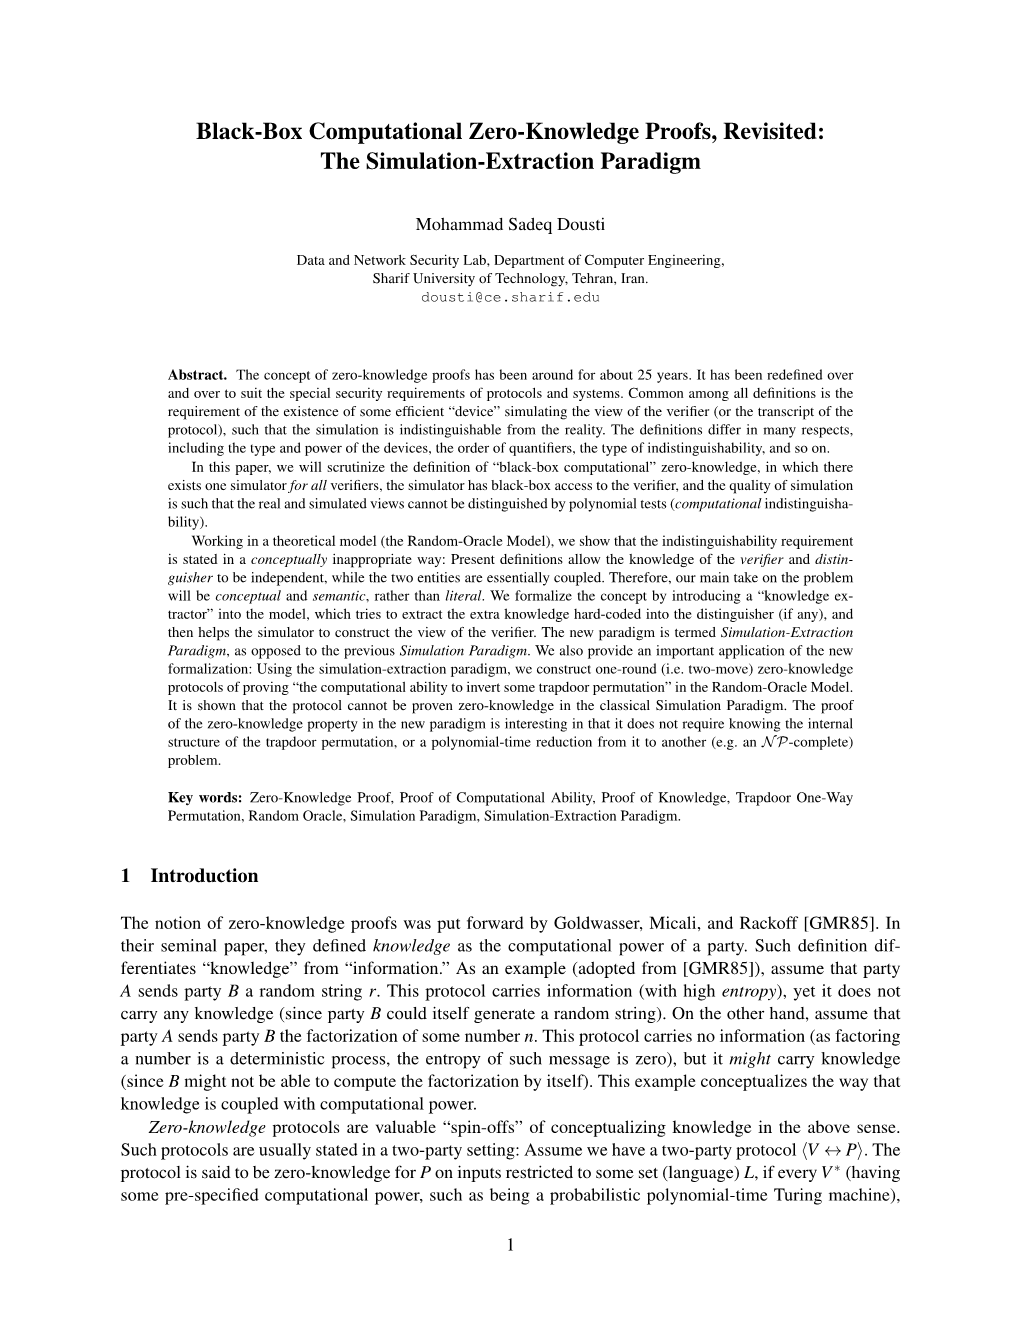 Black-Box Computational Zero-Knowledge Proofs, Revisited: the Simulation-Extraction Paradigm